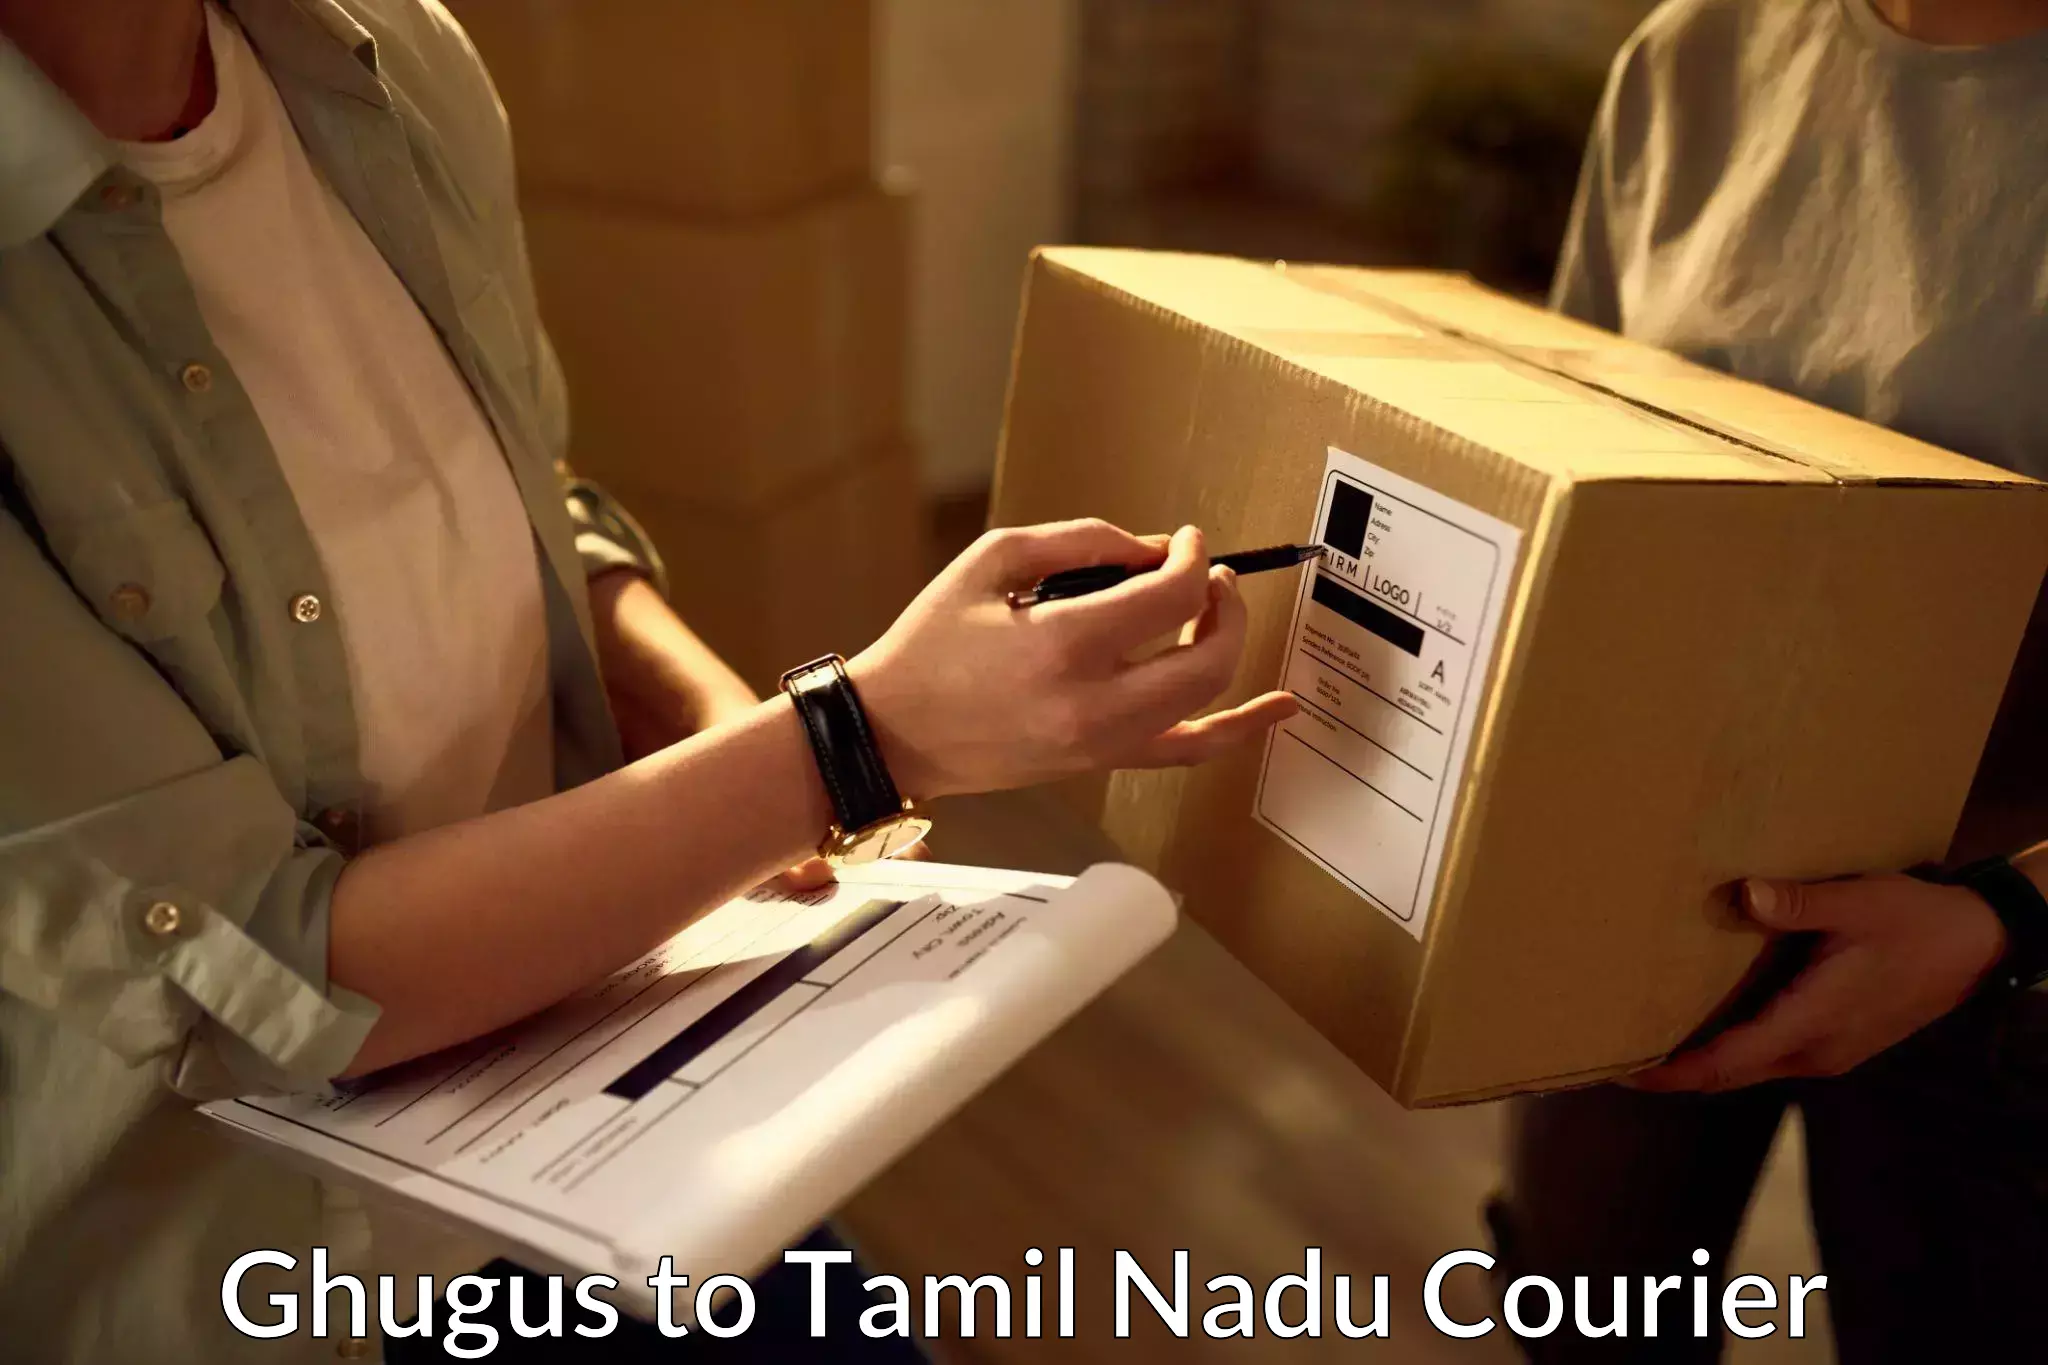 Efficient parcel tracking Ghugus to Palani